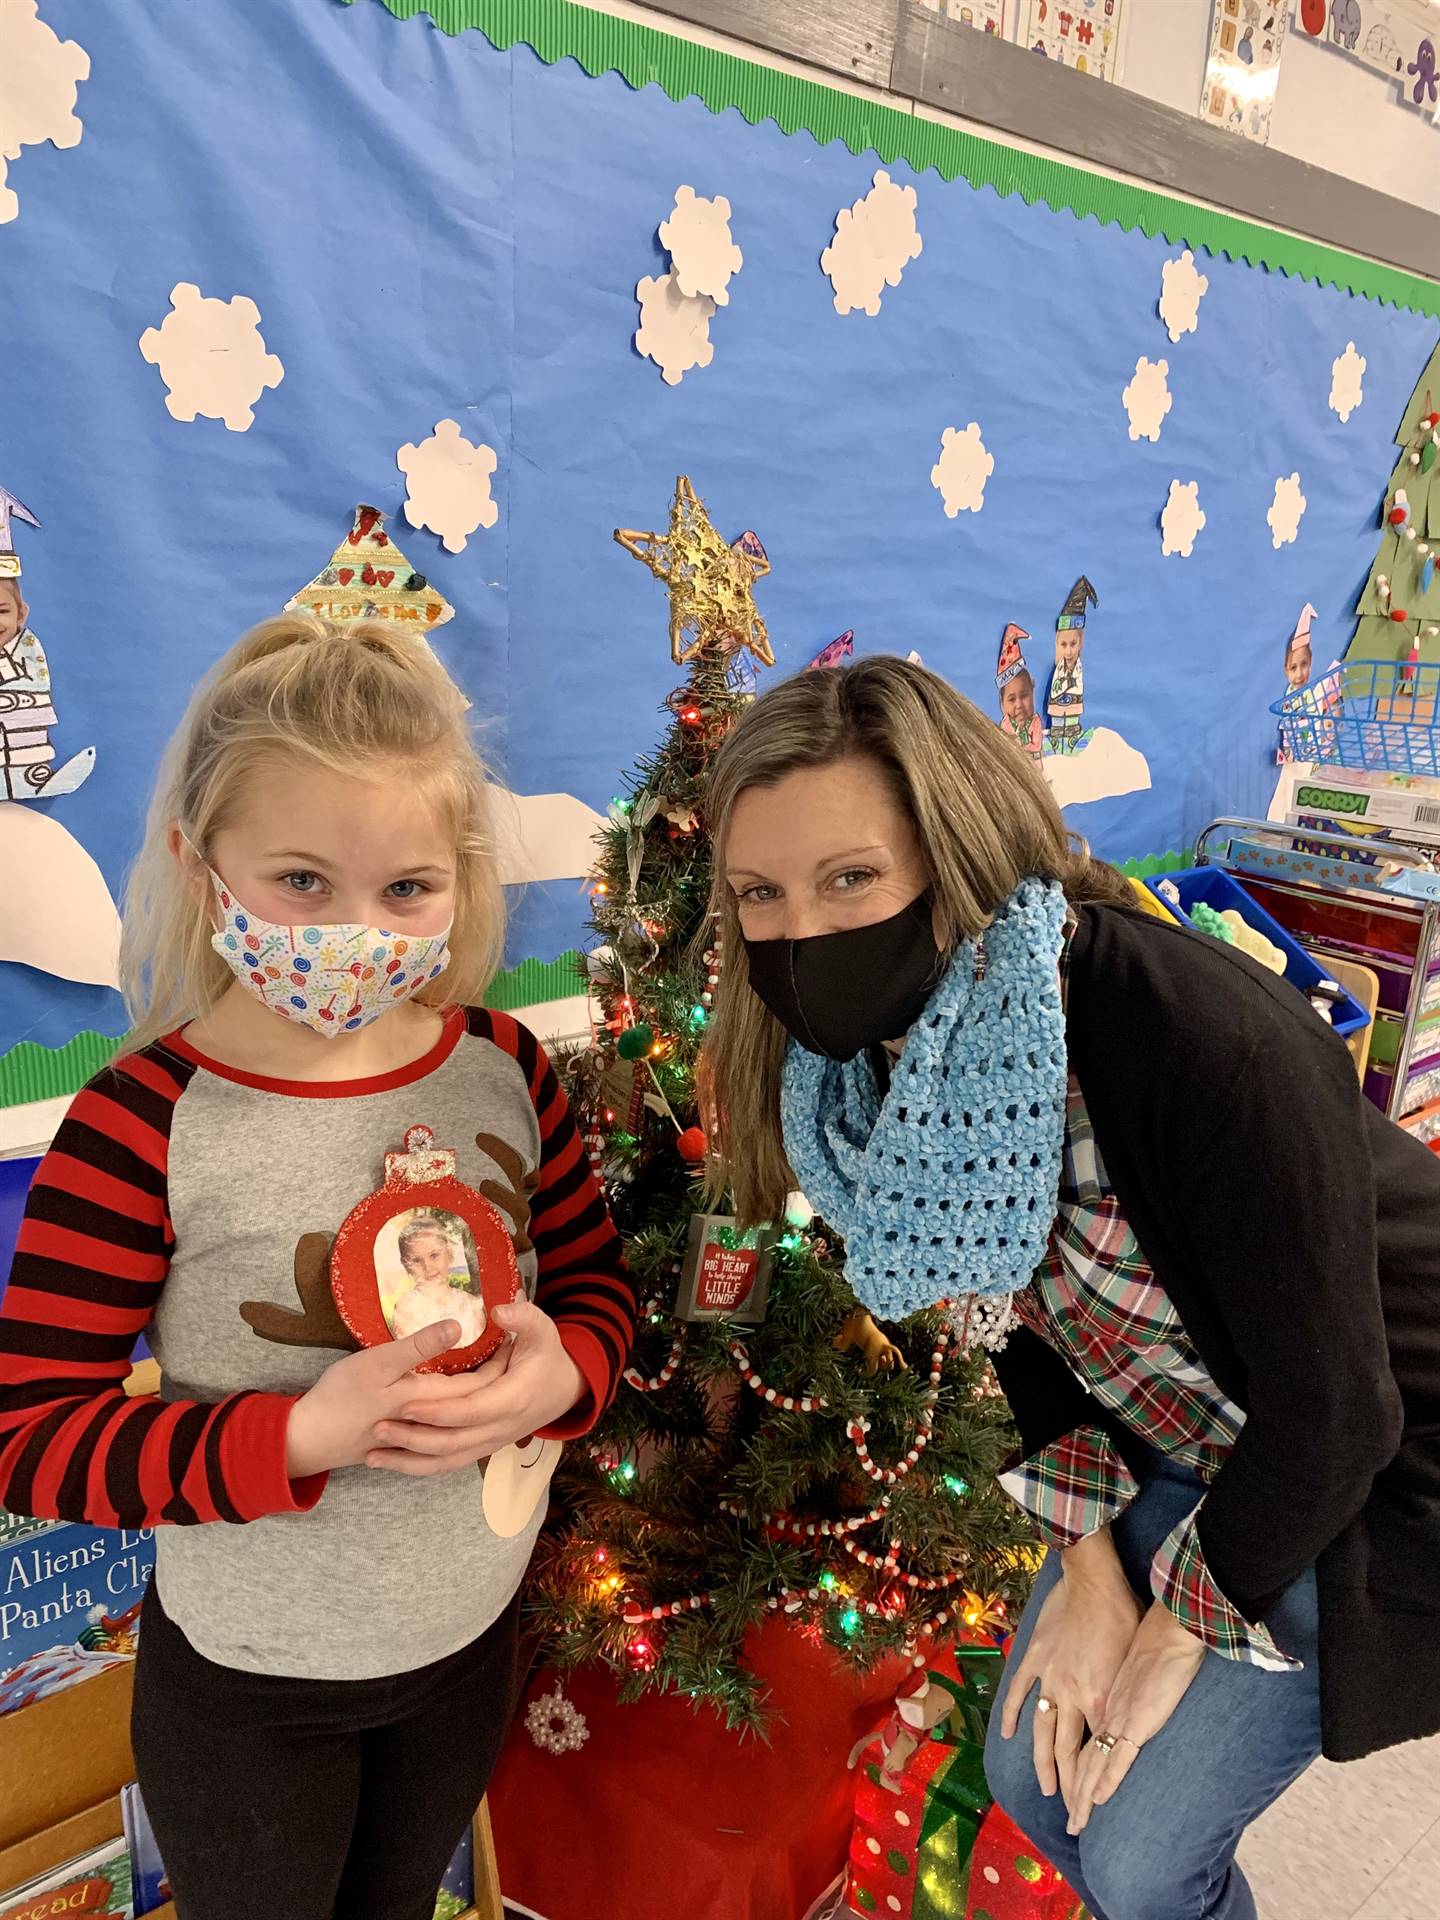 A teacher with blue scarf stands with student holding an ornament. blue background. 